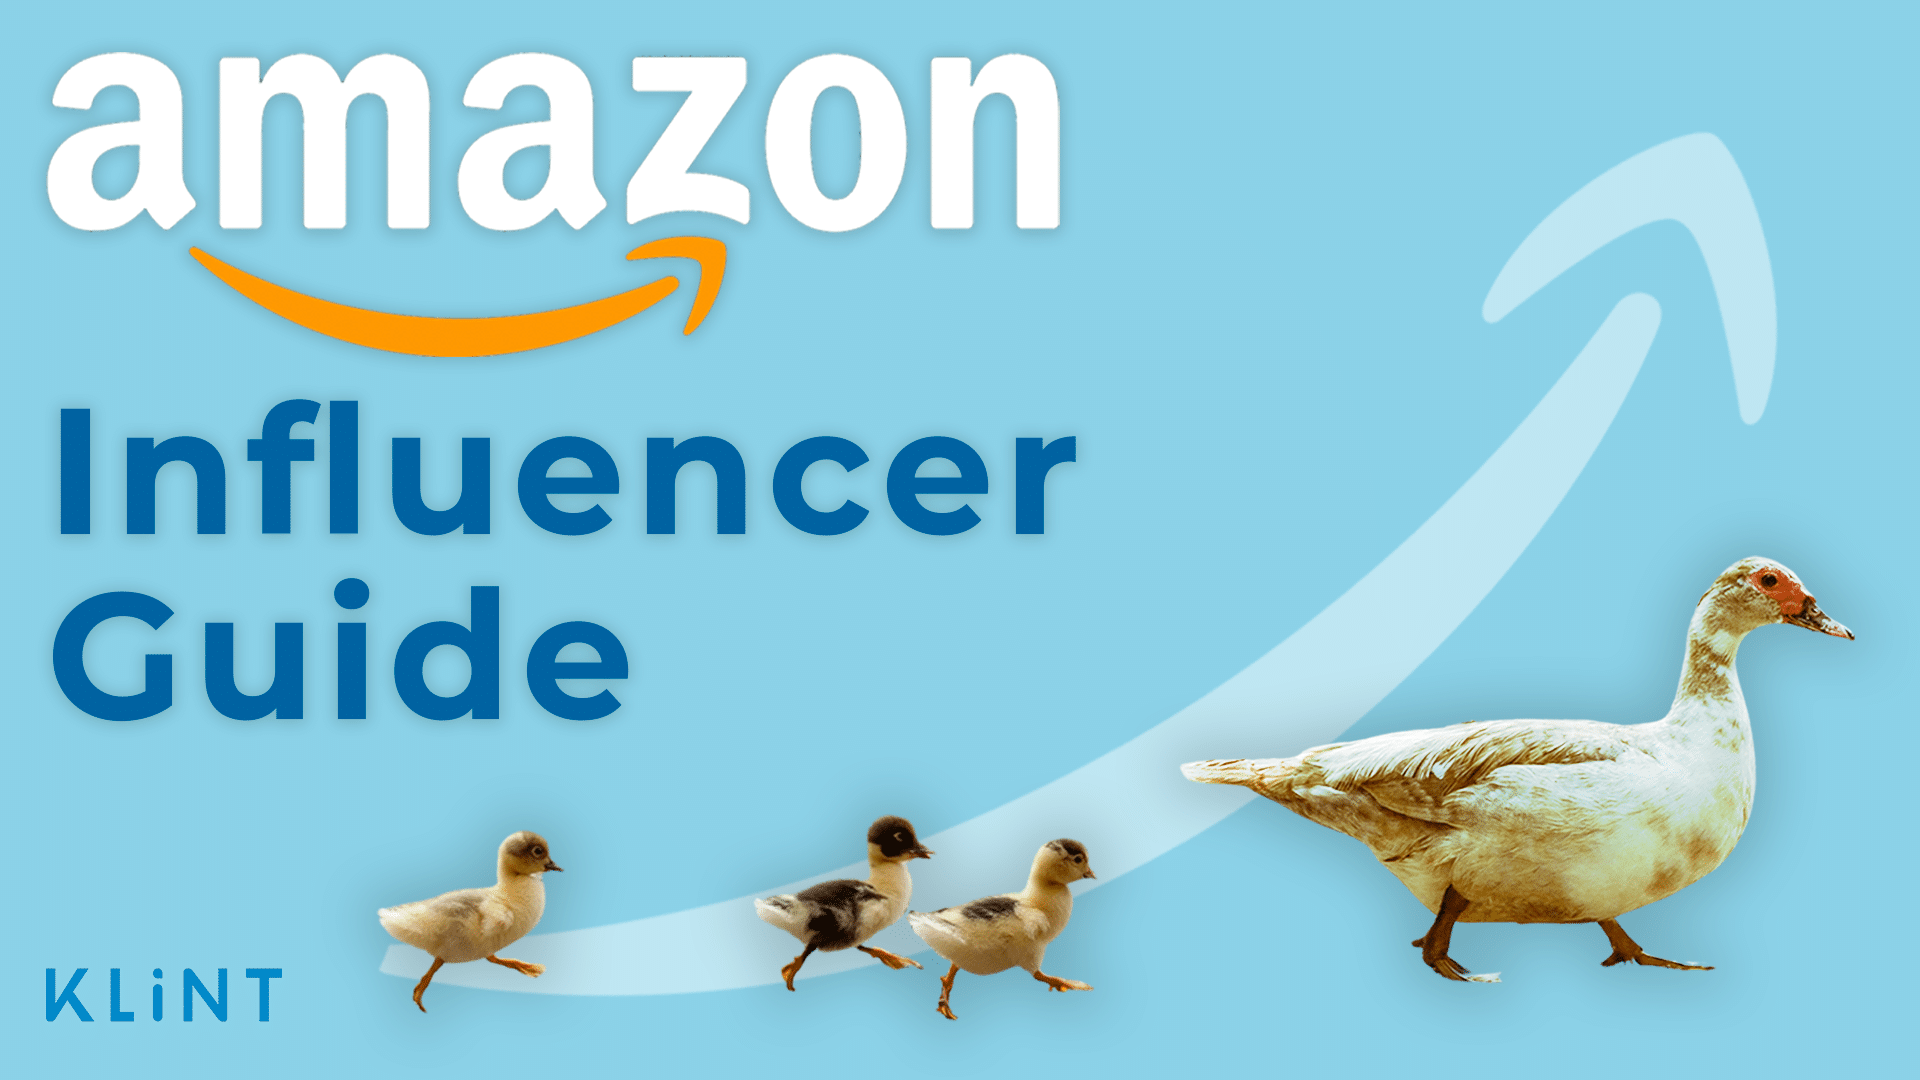 Mother duck followed by baby ducks against blue background. Text overlaid: "Amazon Influencer Guide"